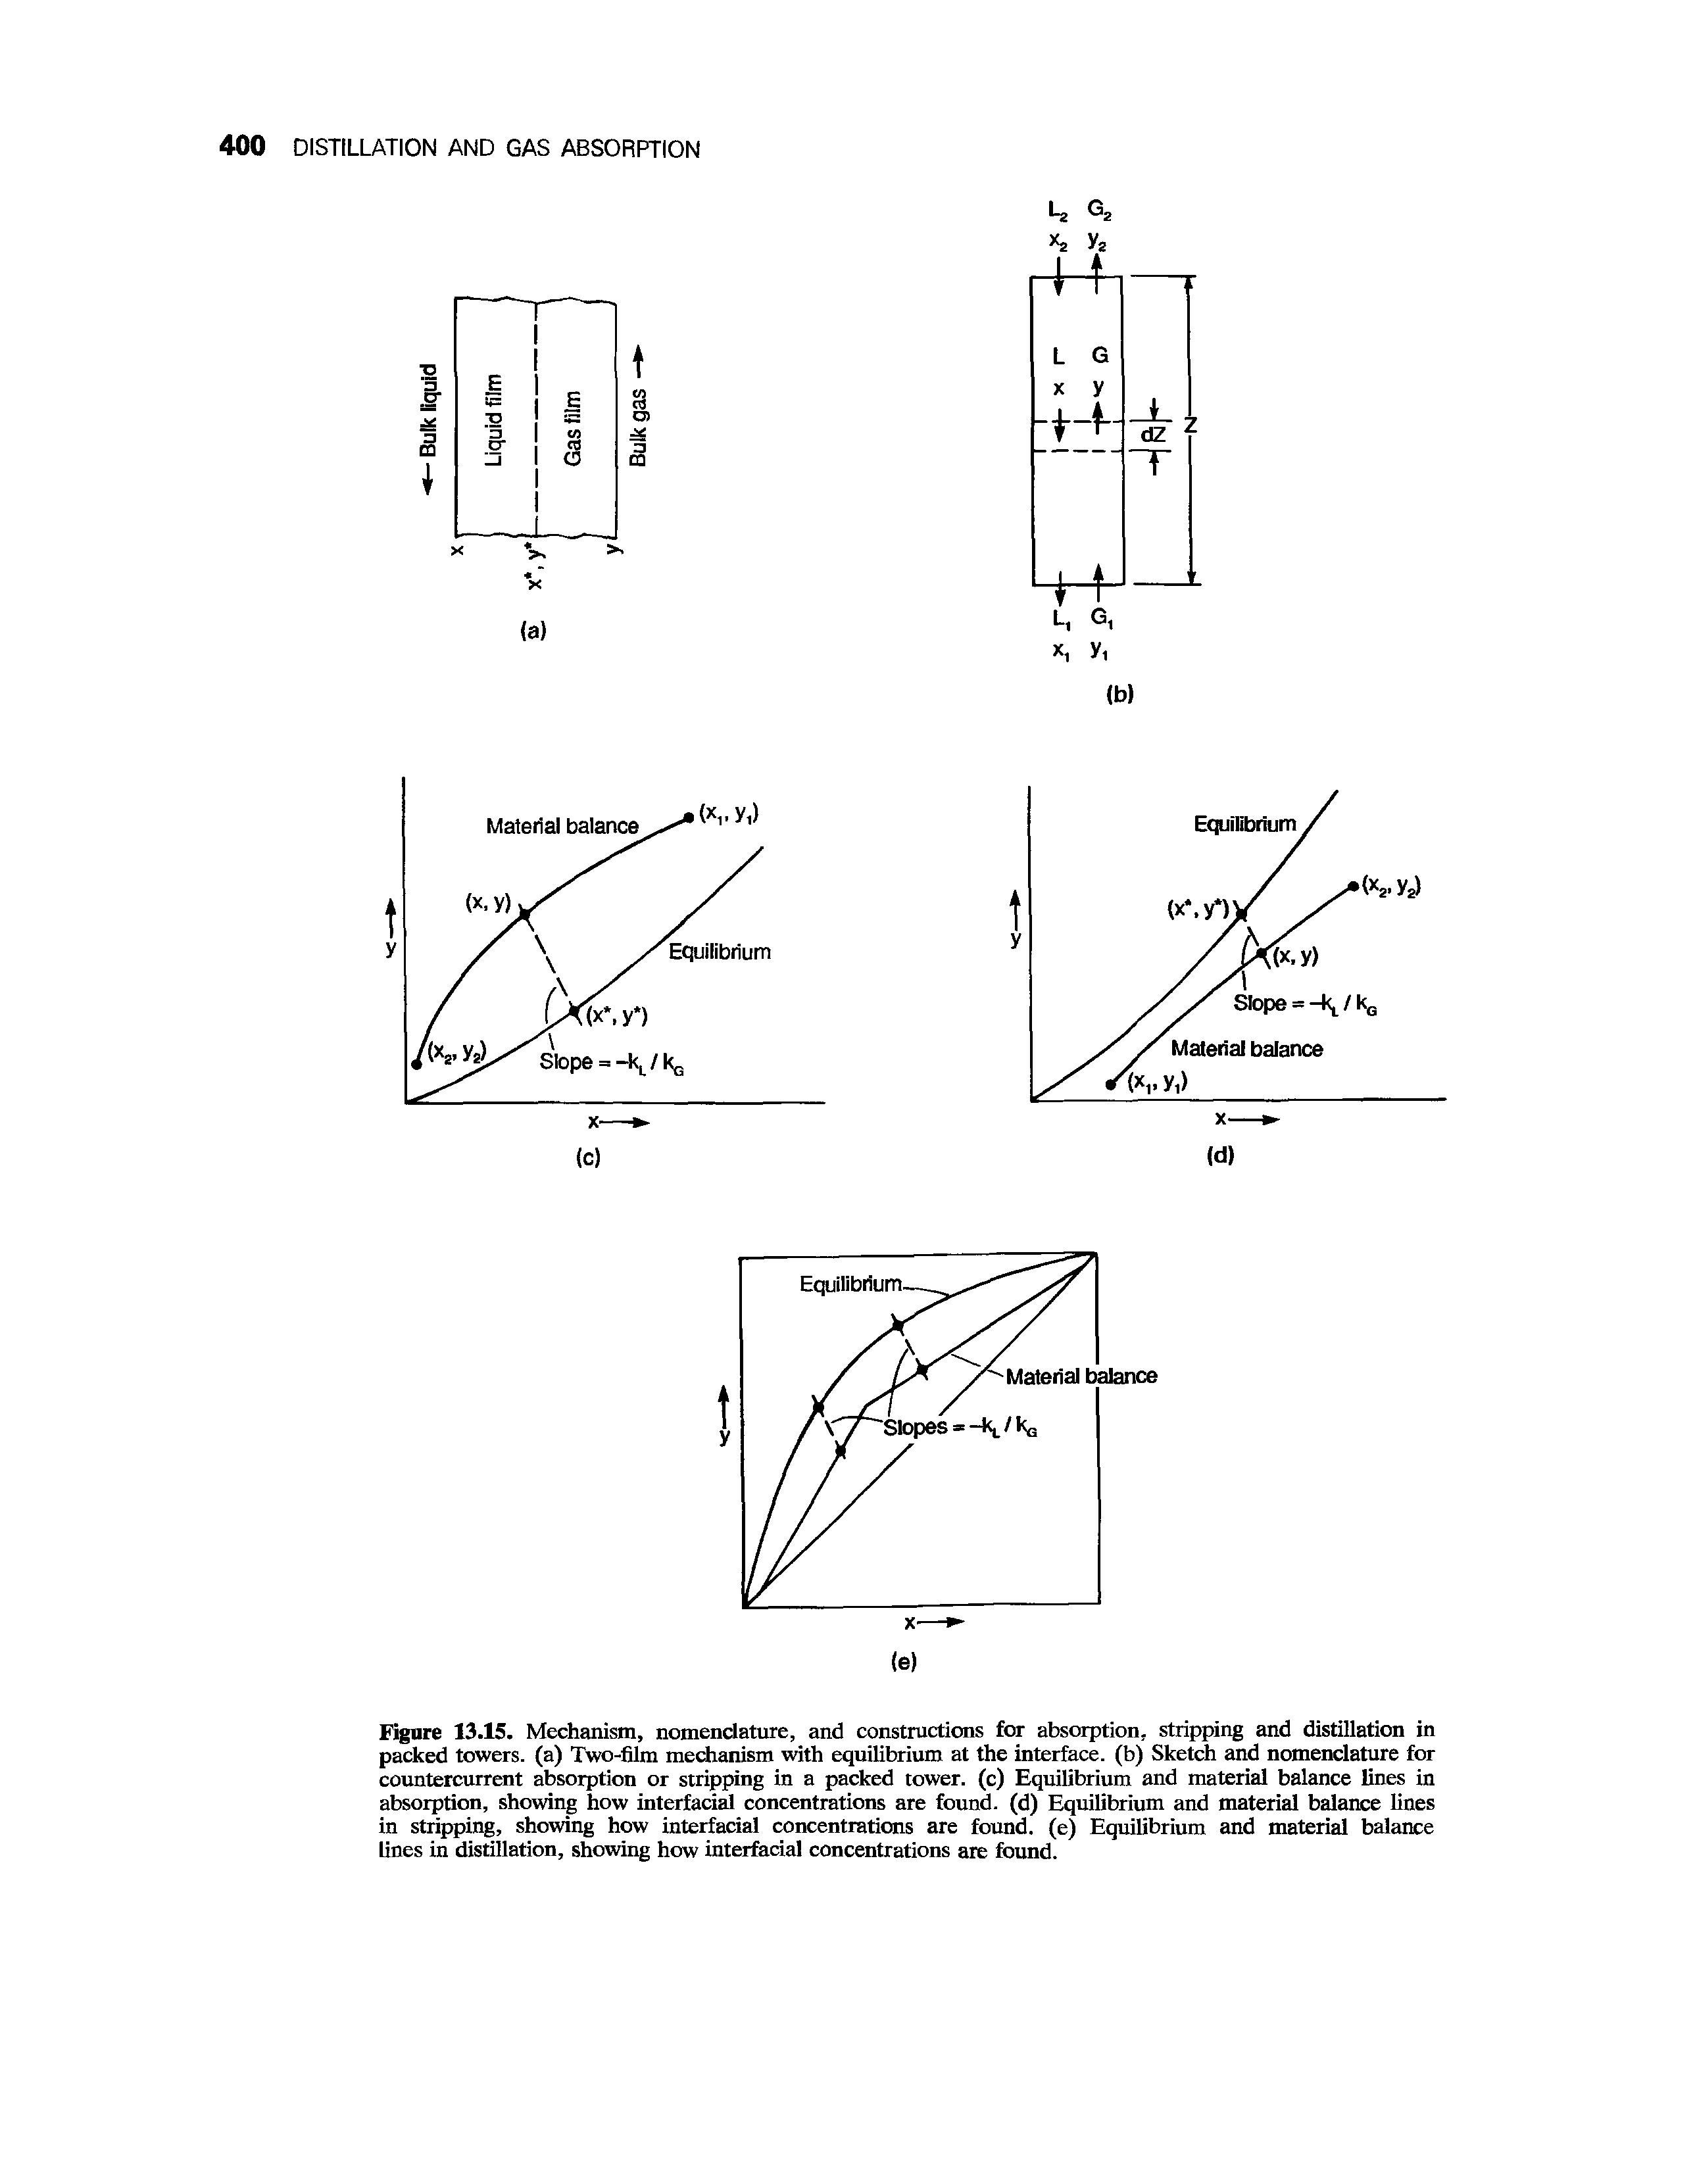 Figure 13.15. Mechanism, nomenclature, and constructions for absorption, stripping and distillation in packed towers, (a) Two-film mechanism with equilibrium at the interface, (b) Sketch and nomenclature for countercurrent absorption or stripping in a packed tower, (c) Equilibrium and material balance lines in absorption, showing how interfacial concentrations are found, (d) Equilibrium and material balance lines in stripping, showing how interfacial concentrations are found, (e) Equilibrium and material balance lines in distillation, showing how interfacial concentrations are found.